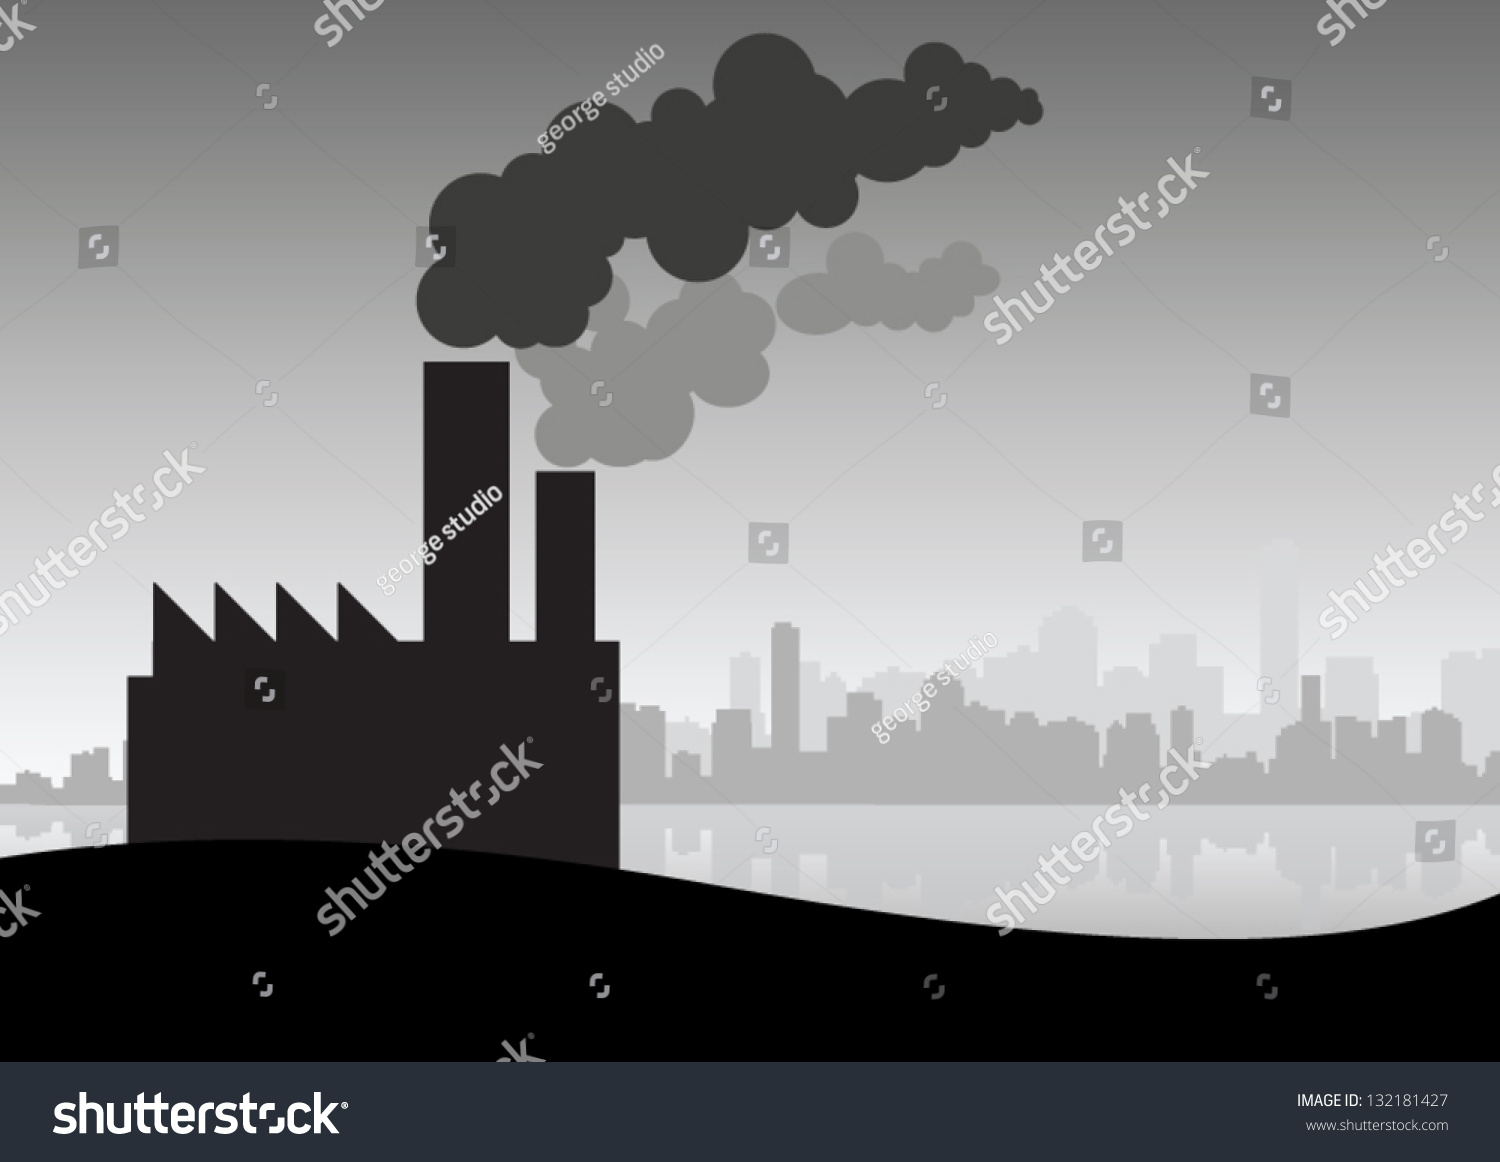 industrial pollution clipart - photo #28